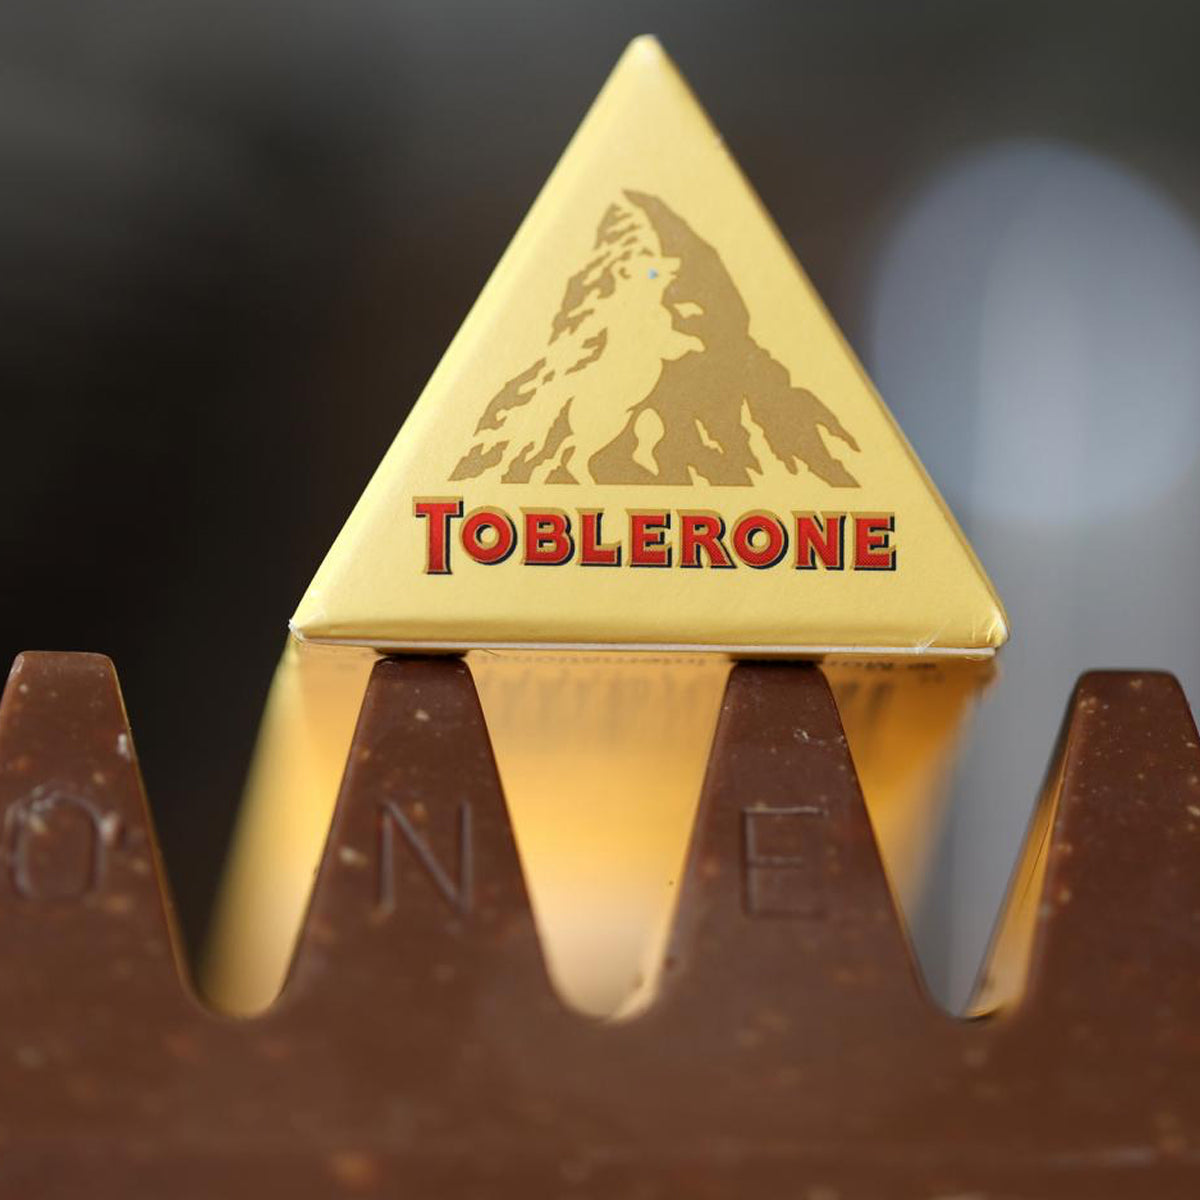 Toblerone is the beloved Swiss chocolate brand that we can't get enough of.